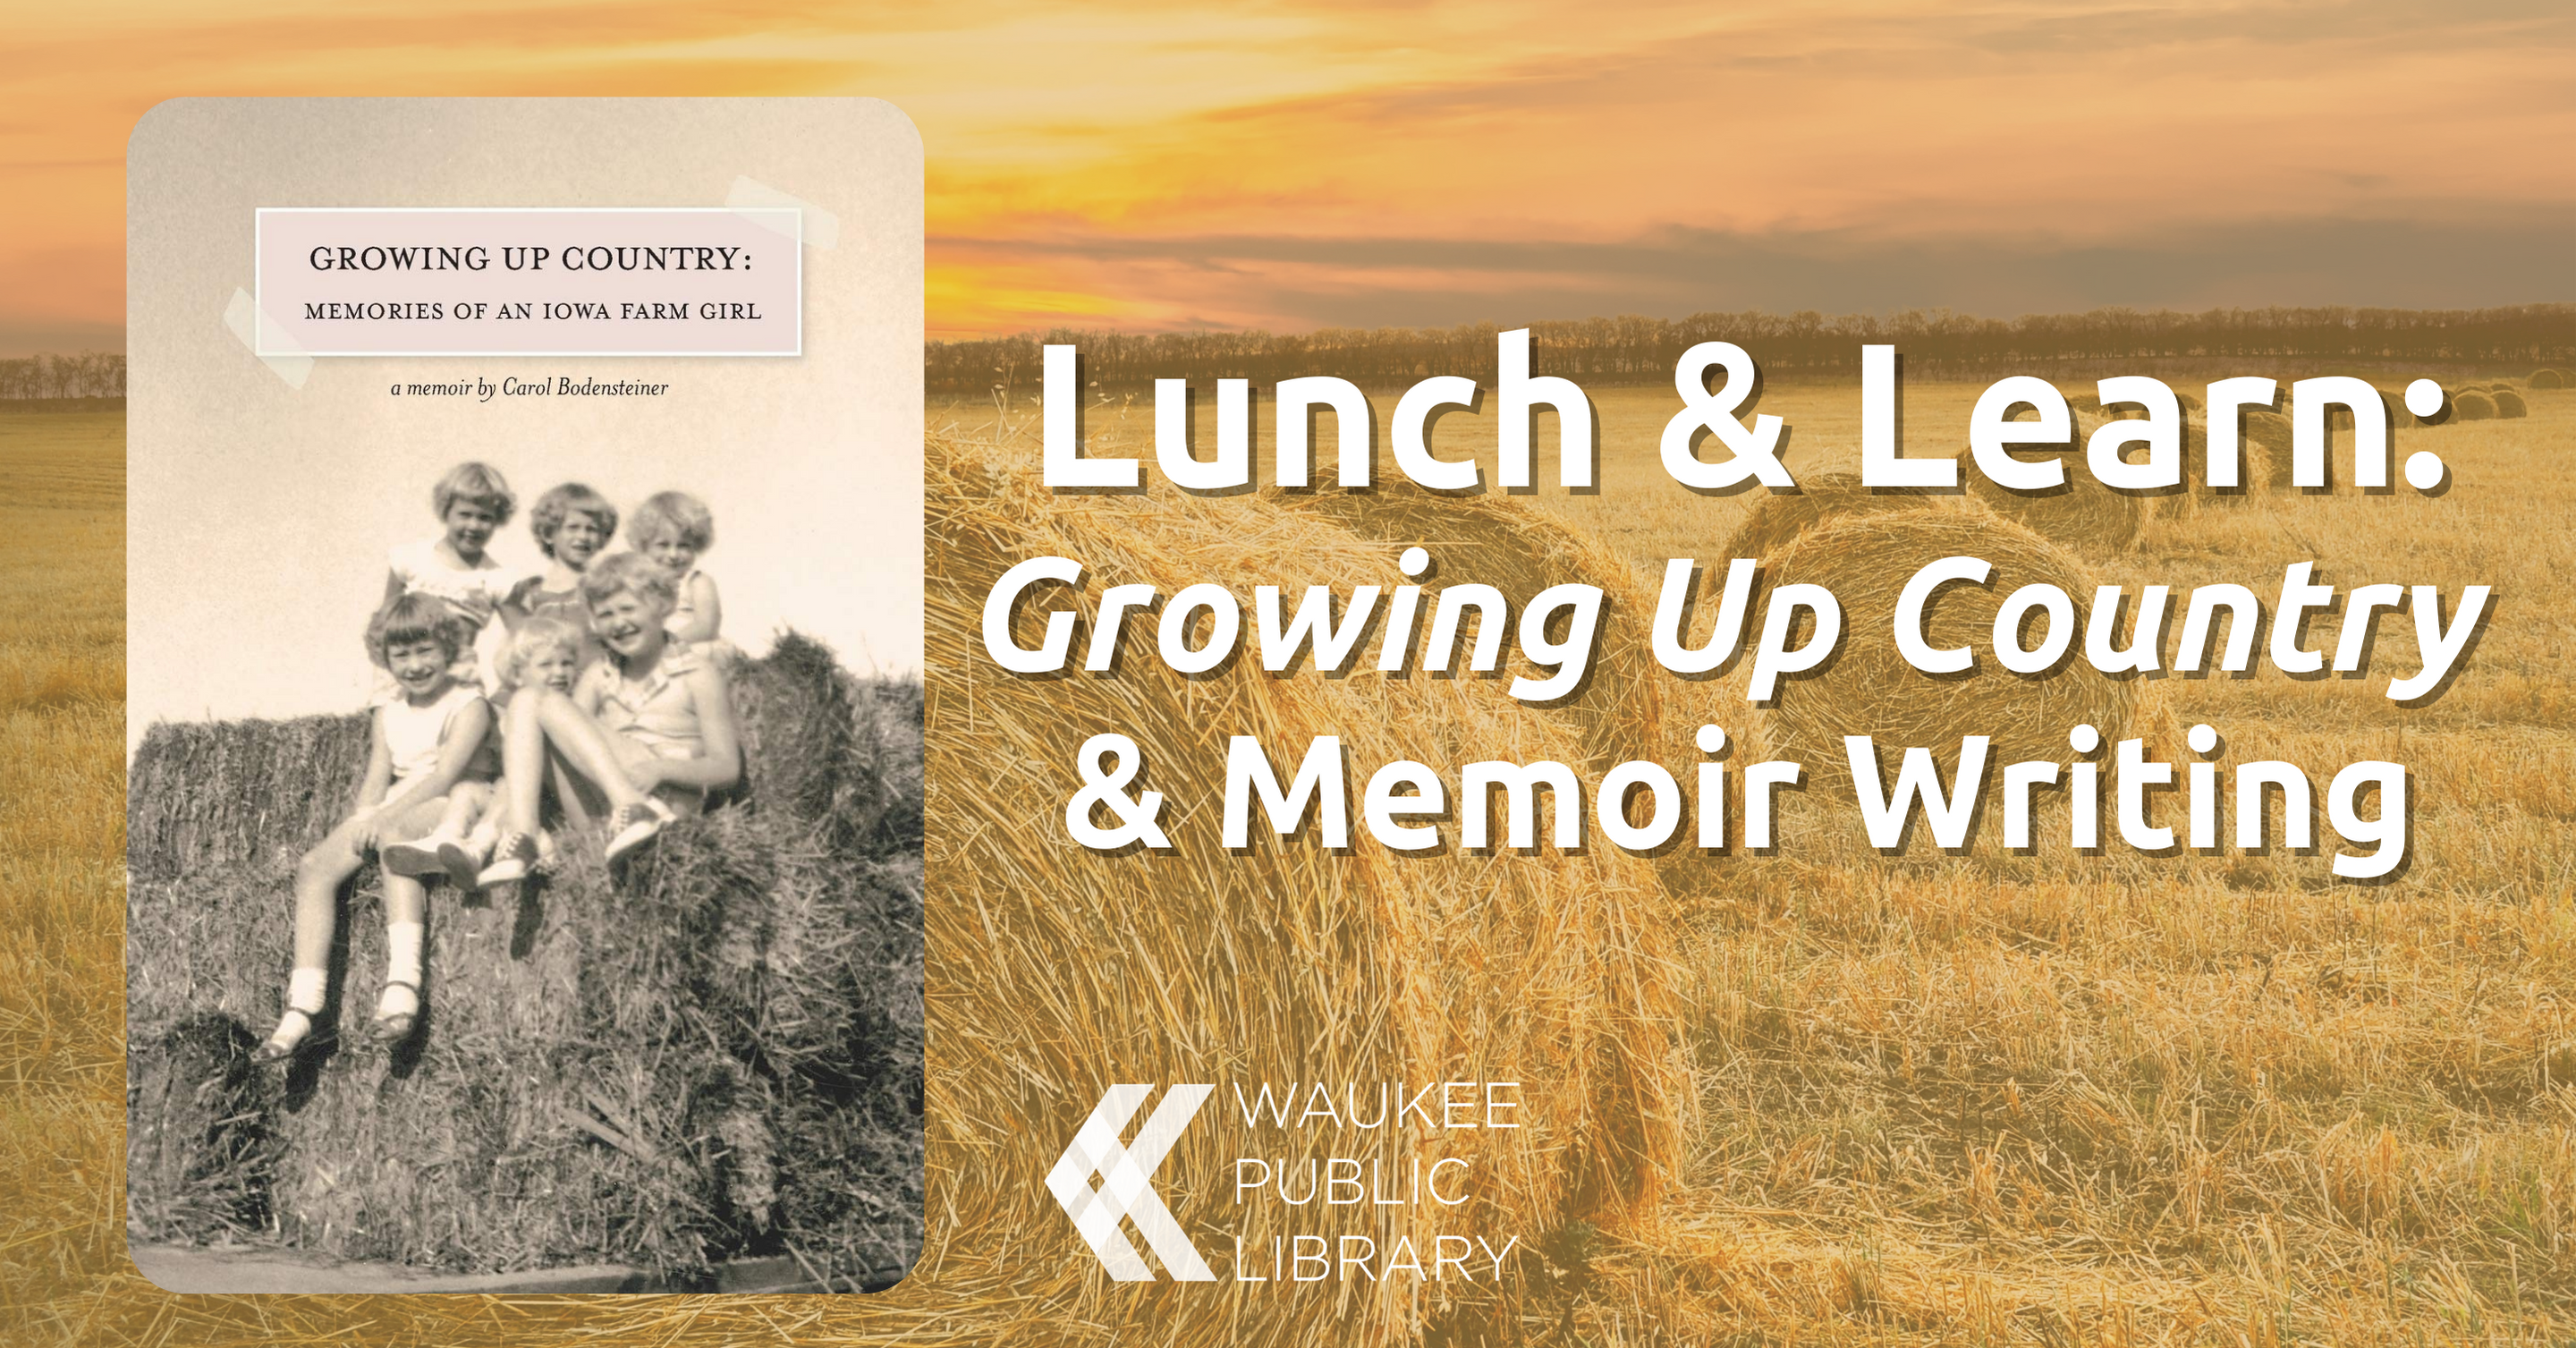 Lunch & Learn: Growing Up Country & Memoir Writing